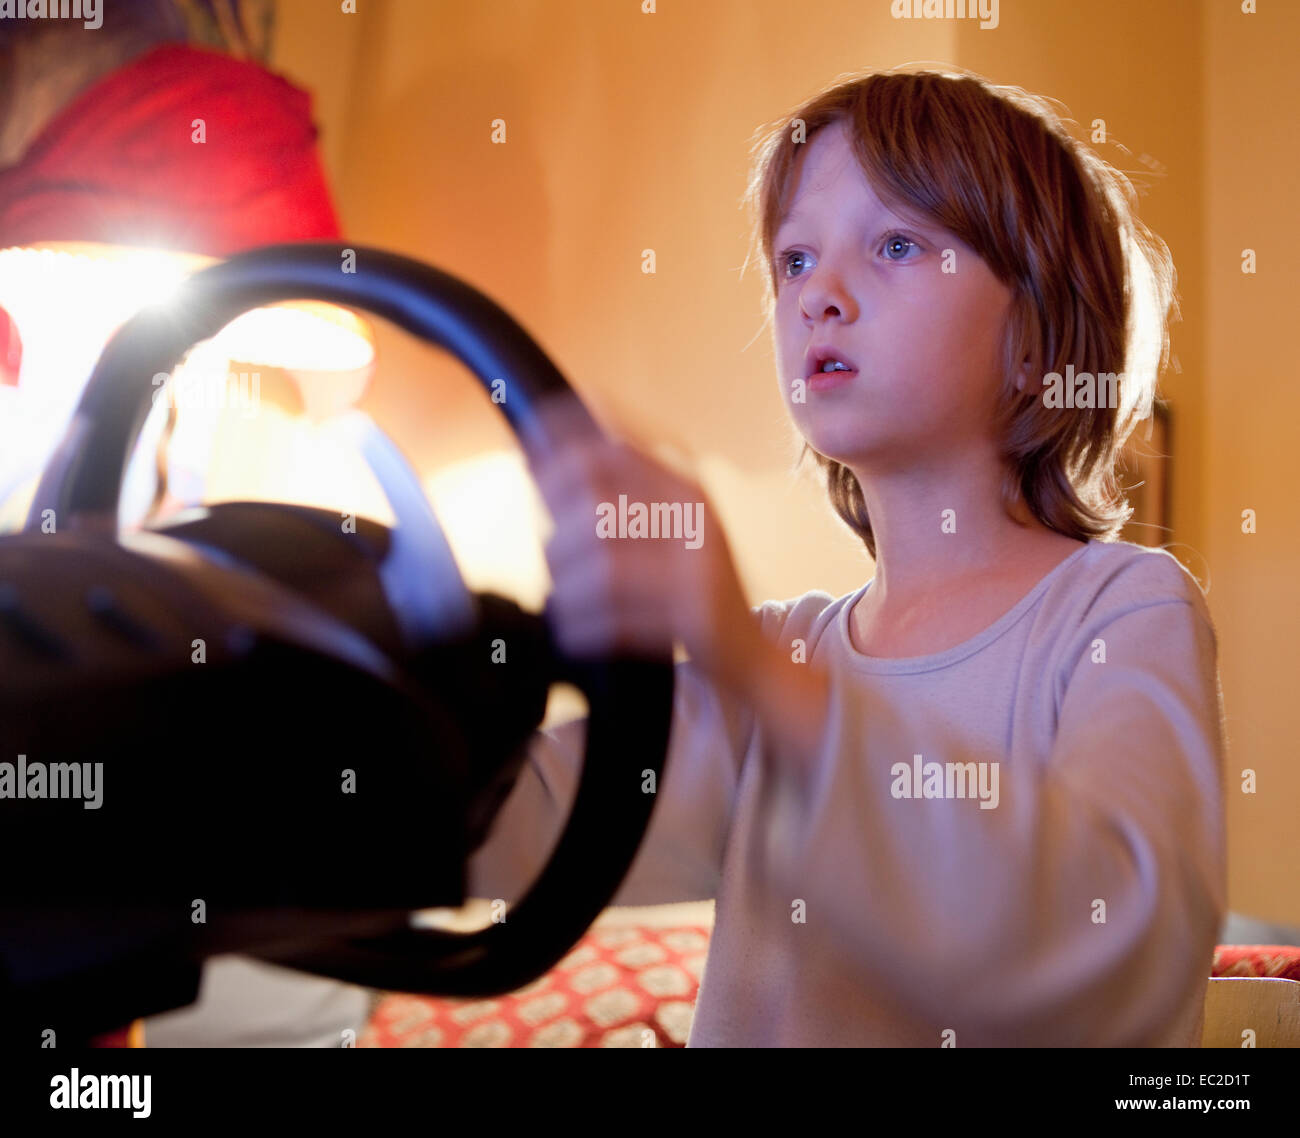 Boy Playing Racing Console Game with Steering Wheel Stock Photo